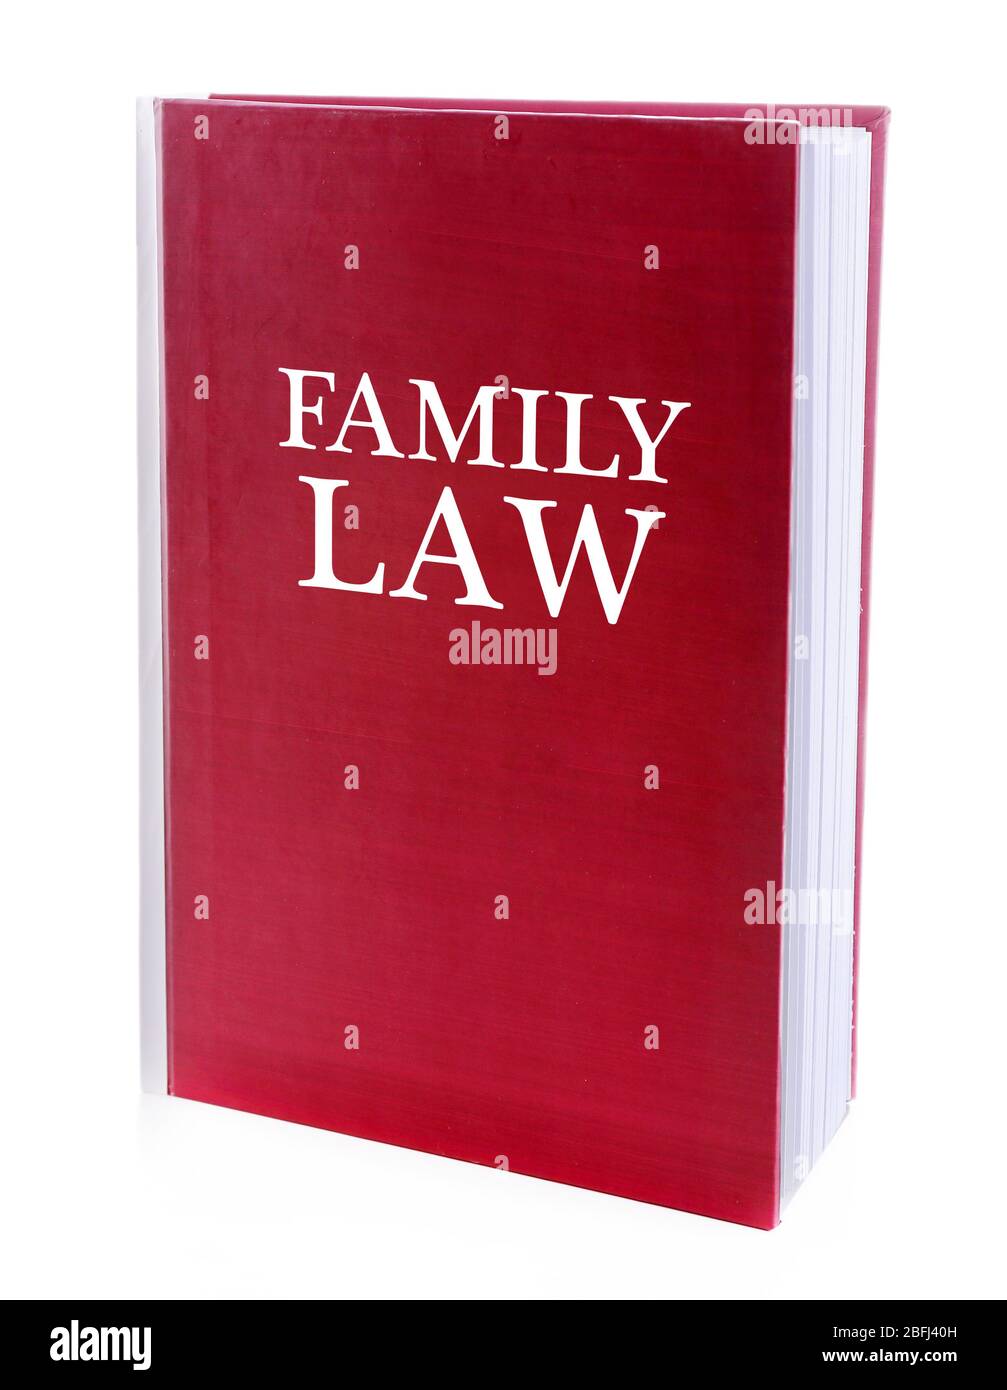 Family LAW book isolated on white Stock Photo